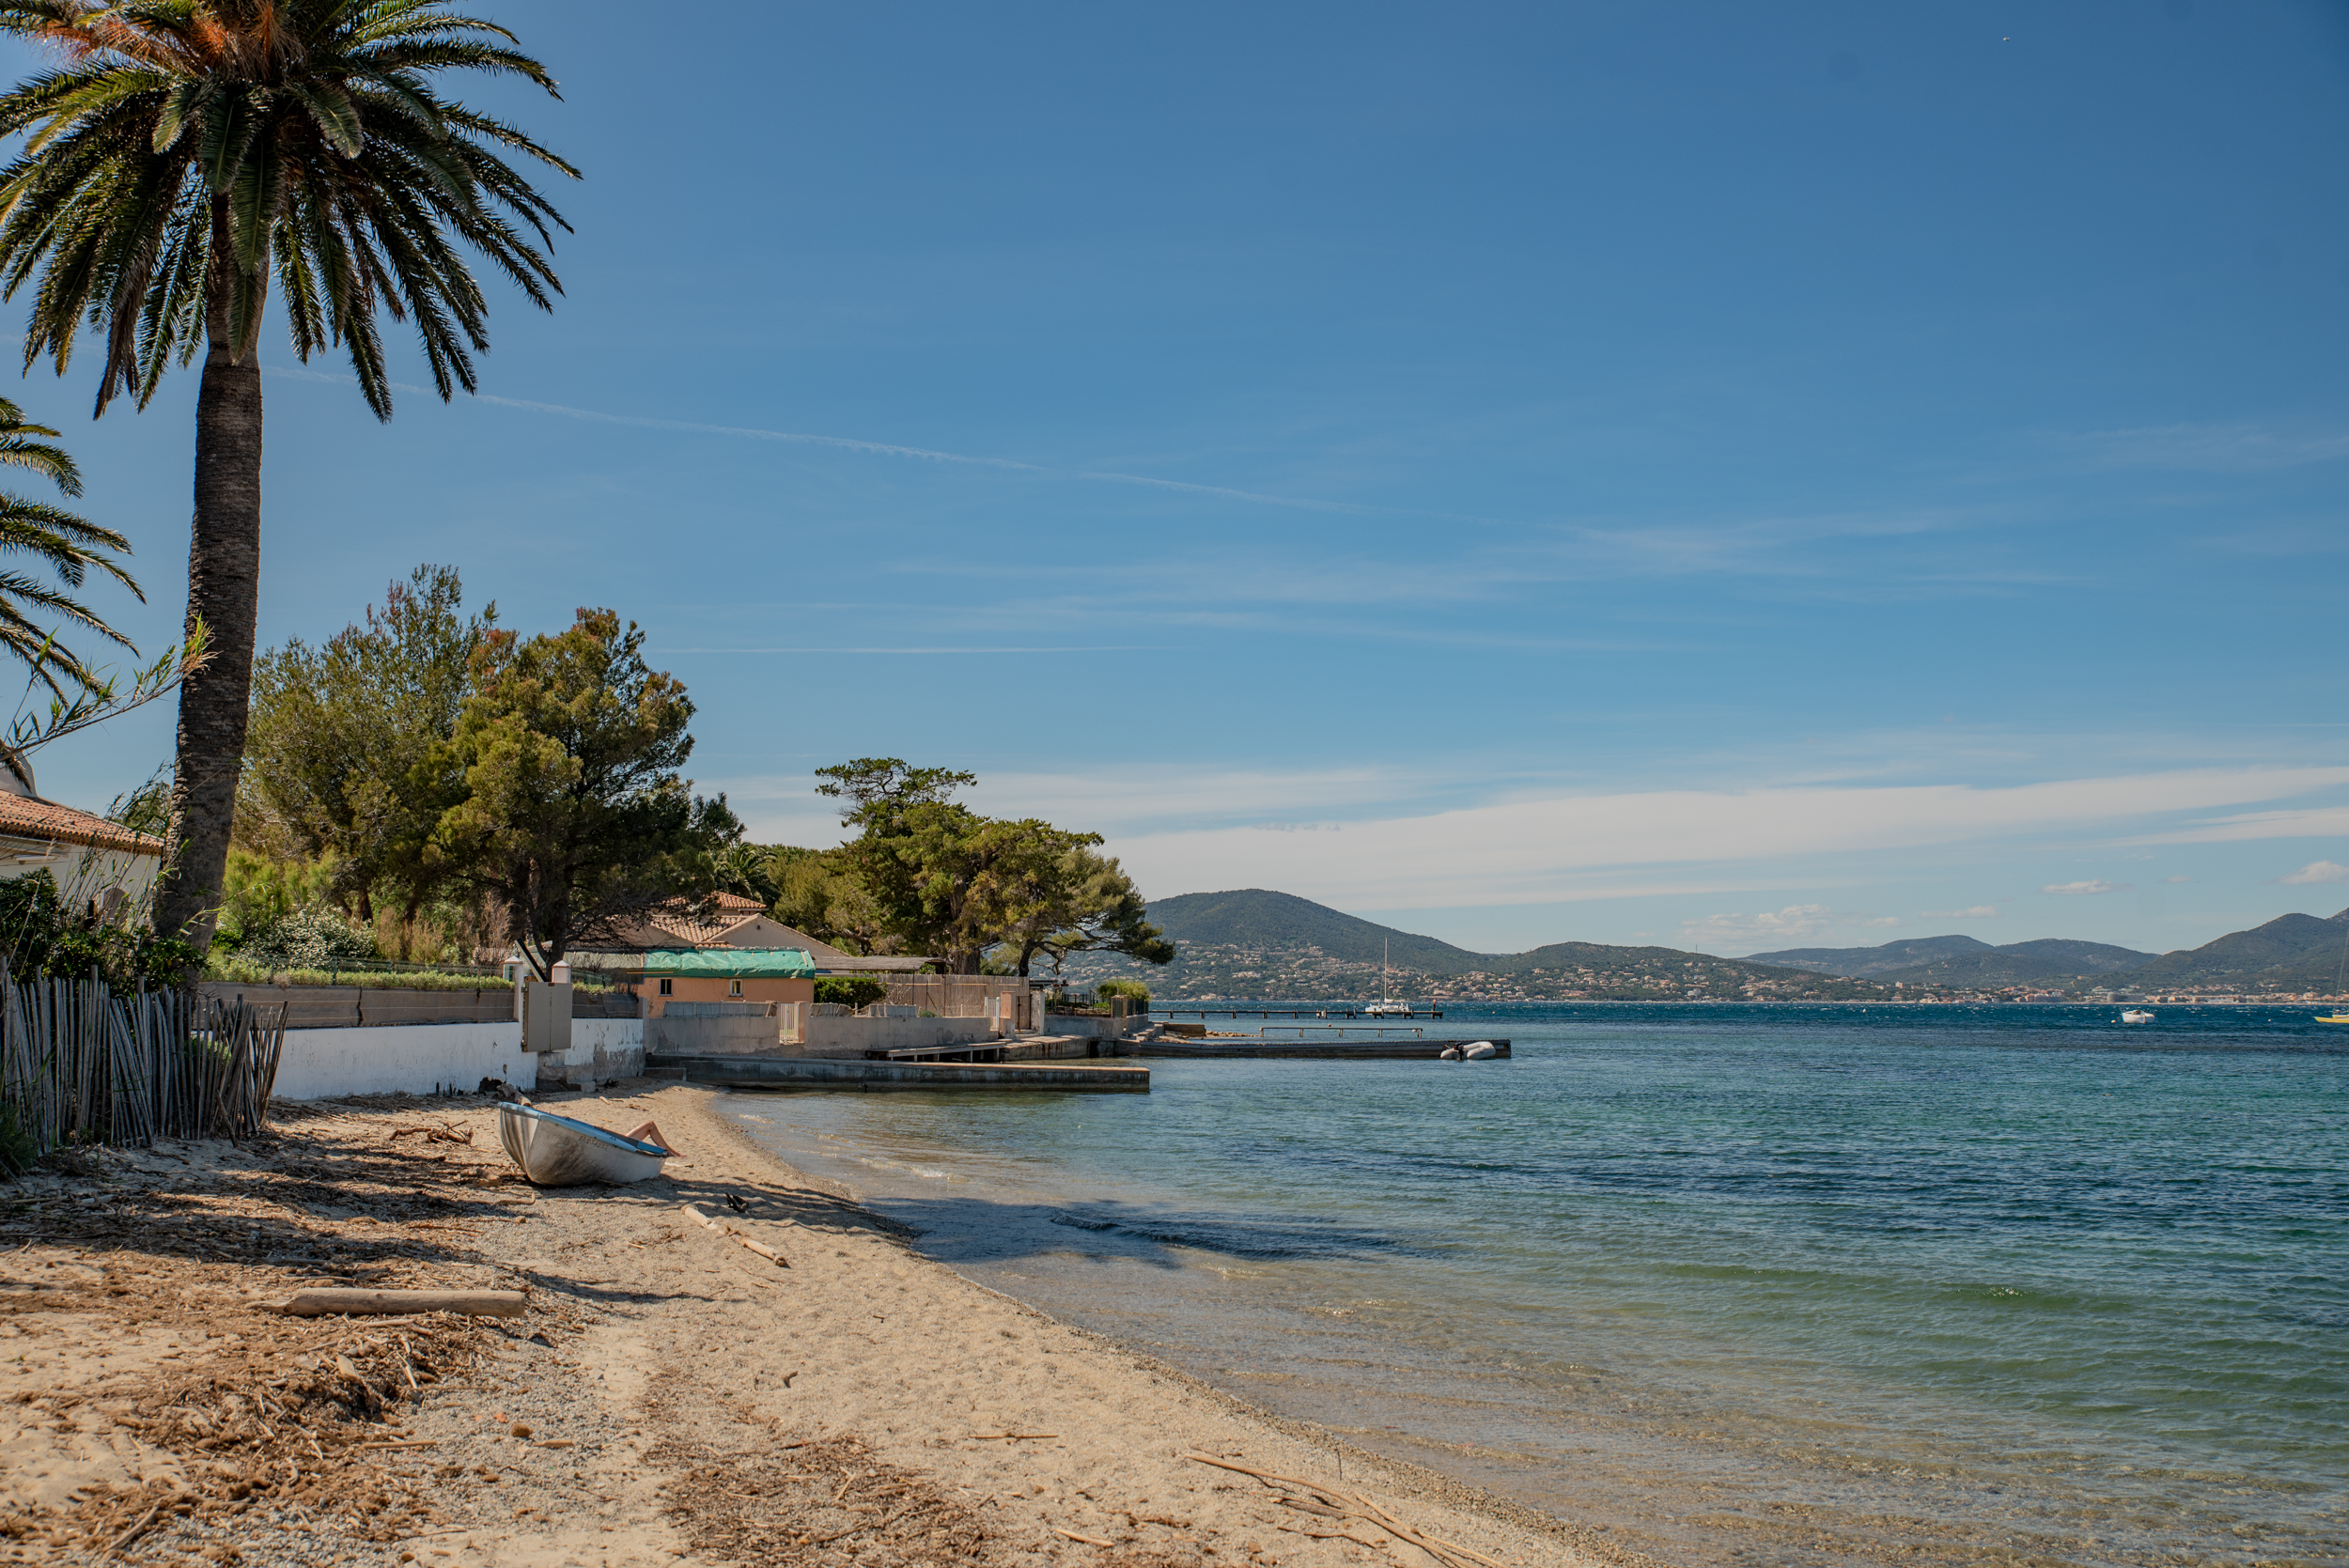 10 Best Beaches in St Tropez - What is the Most Popular Beach in